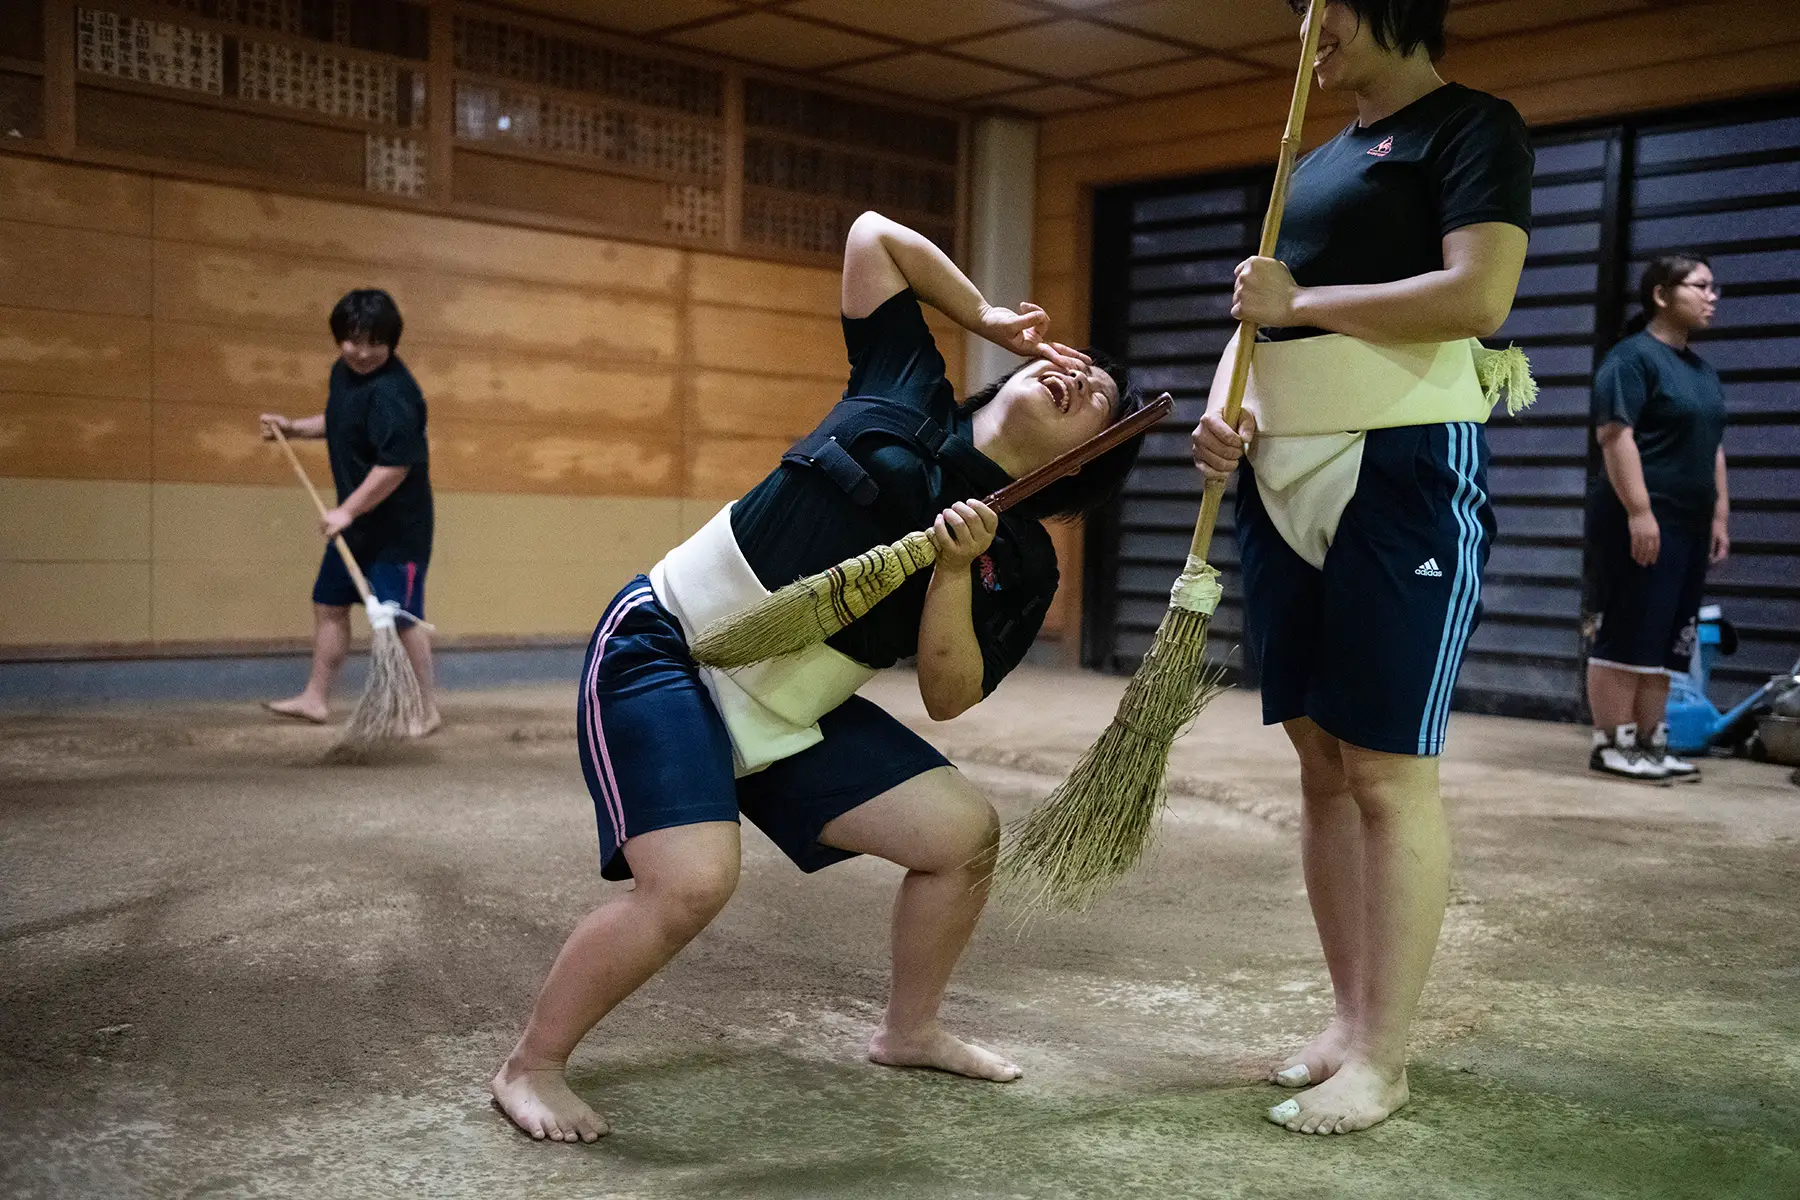 Members of Asahi University women's sumo team joke around as they sweep the dohyo (sumo ring) after a training session 